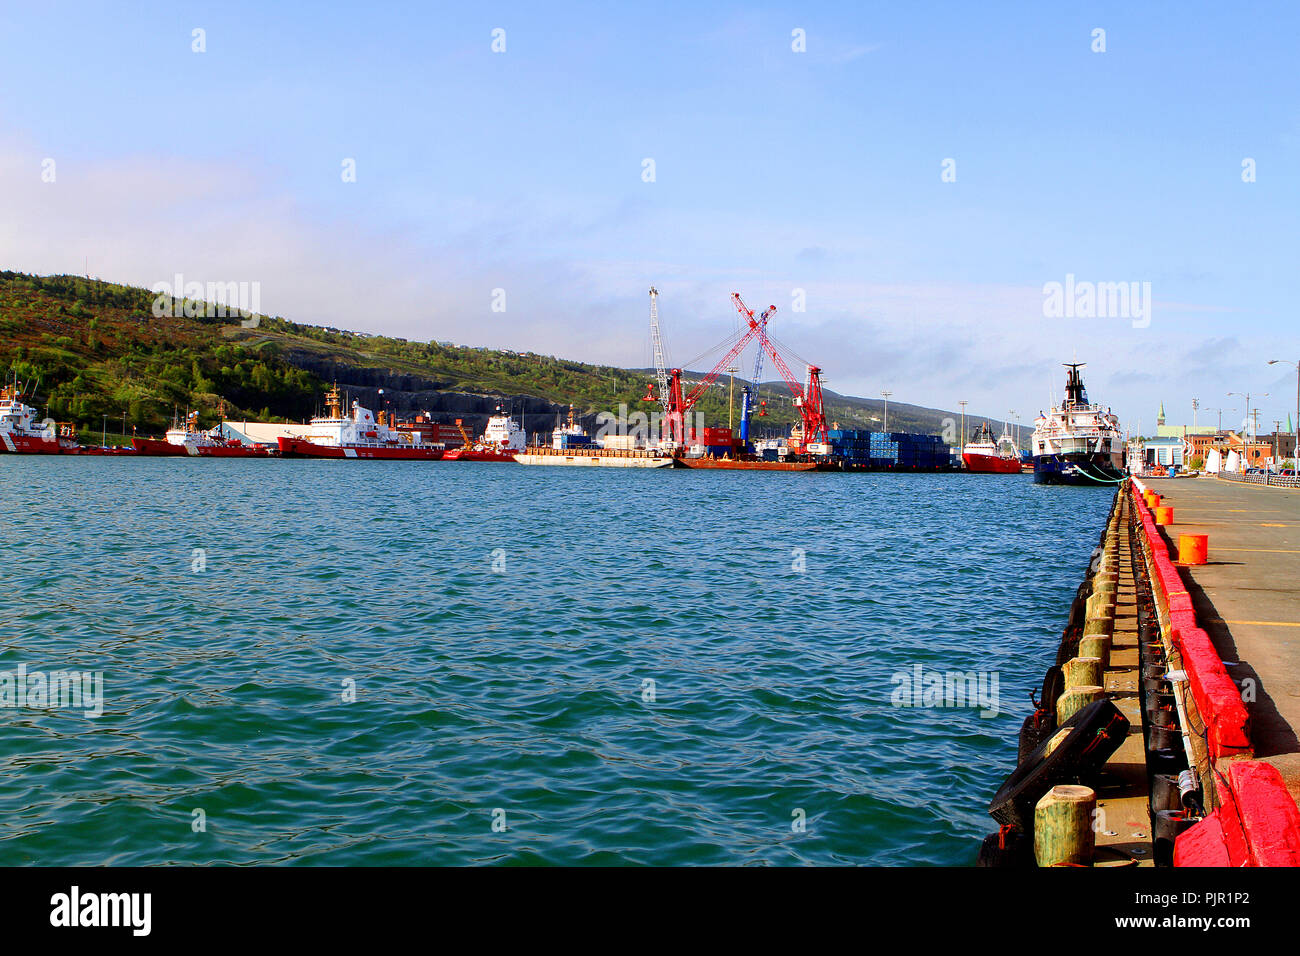 St. John's Harbour in downtown St. John's, Newfoundland, Canada. Stock Photo